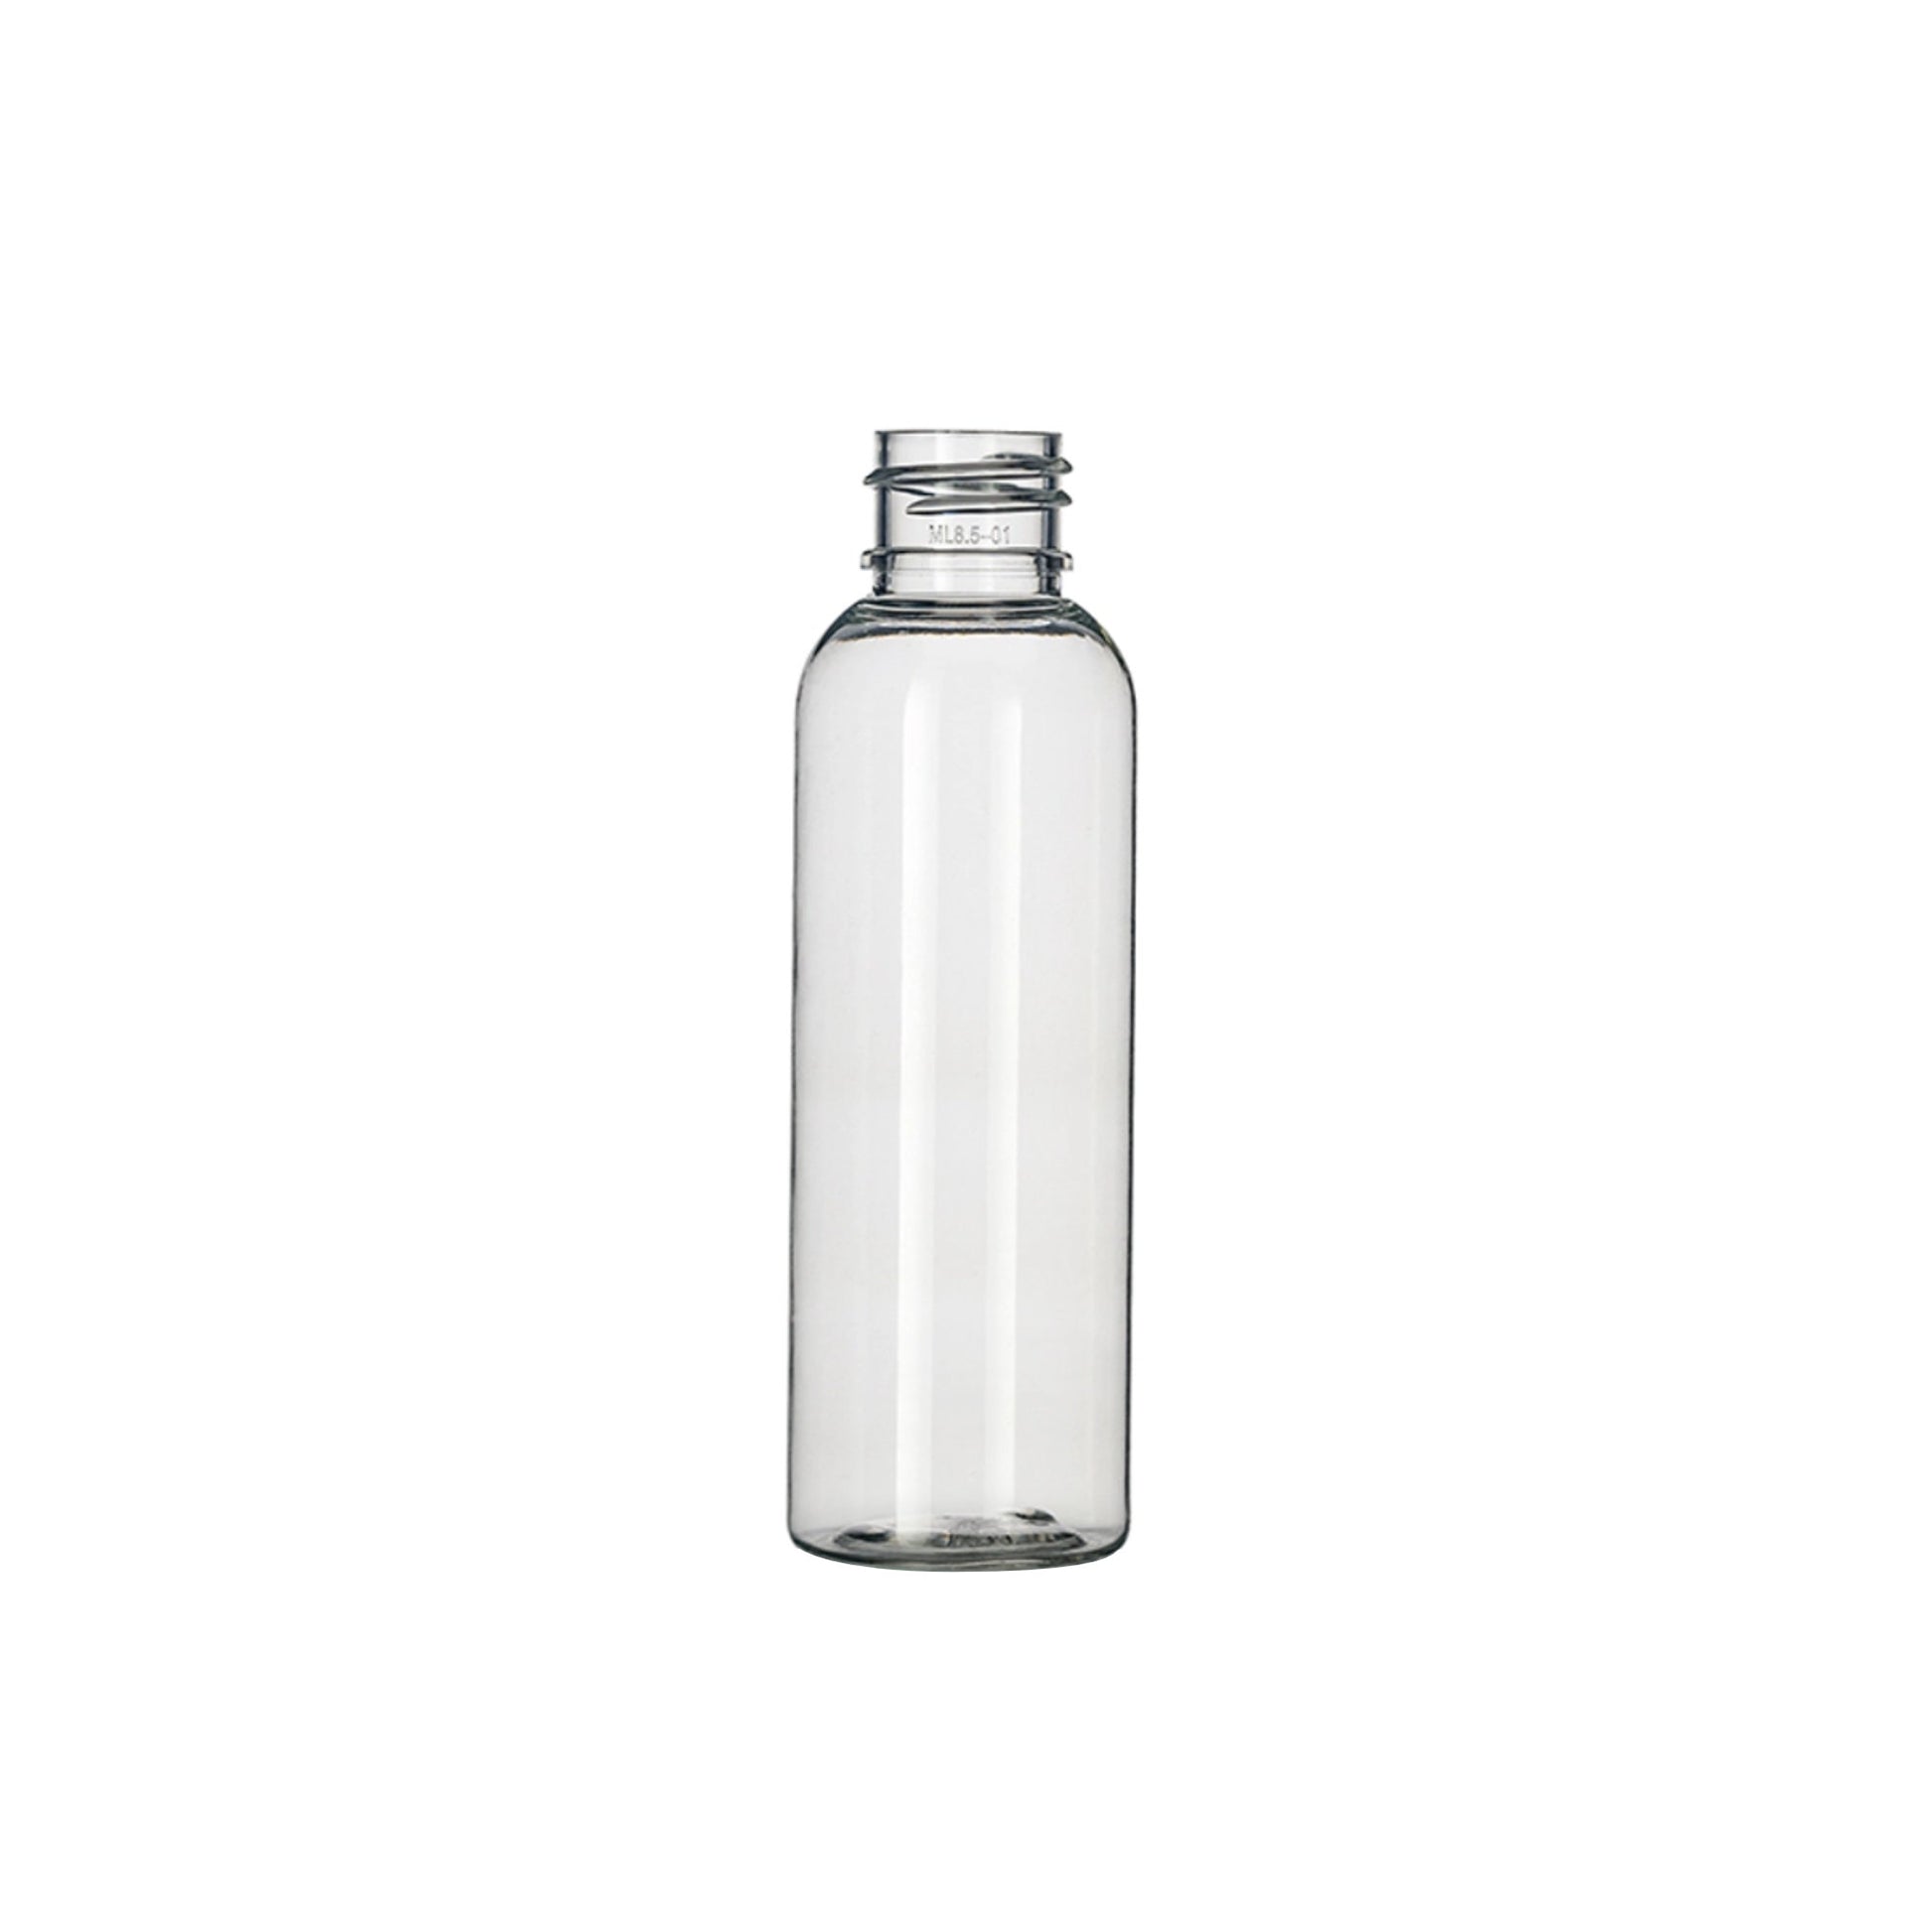 PET Bullet Bottle - Clear - 2 oz. - The Flaming Candle Company